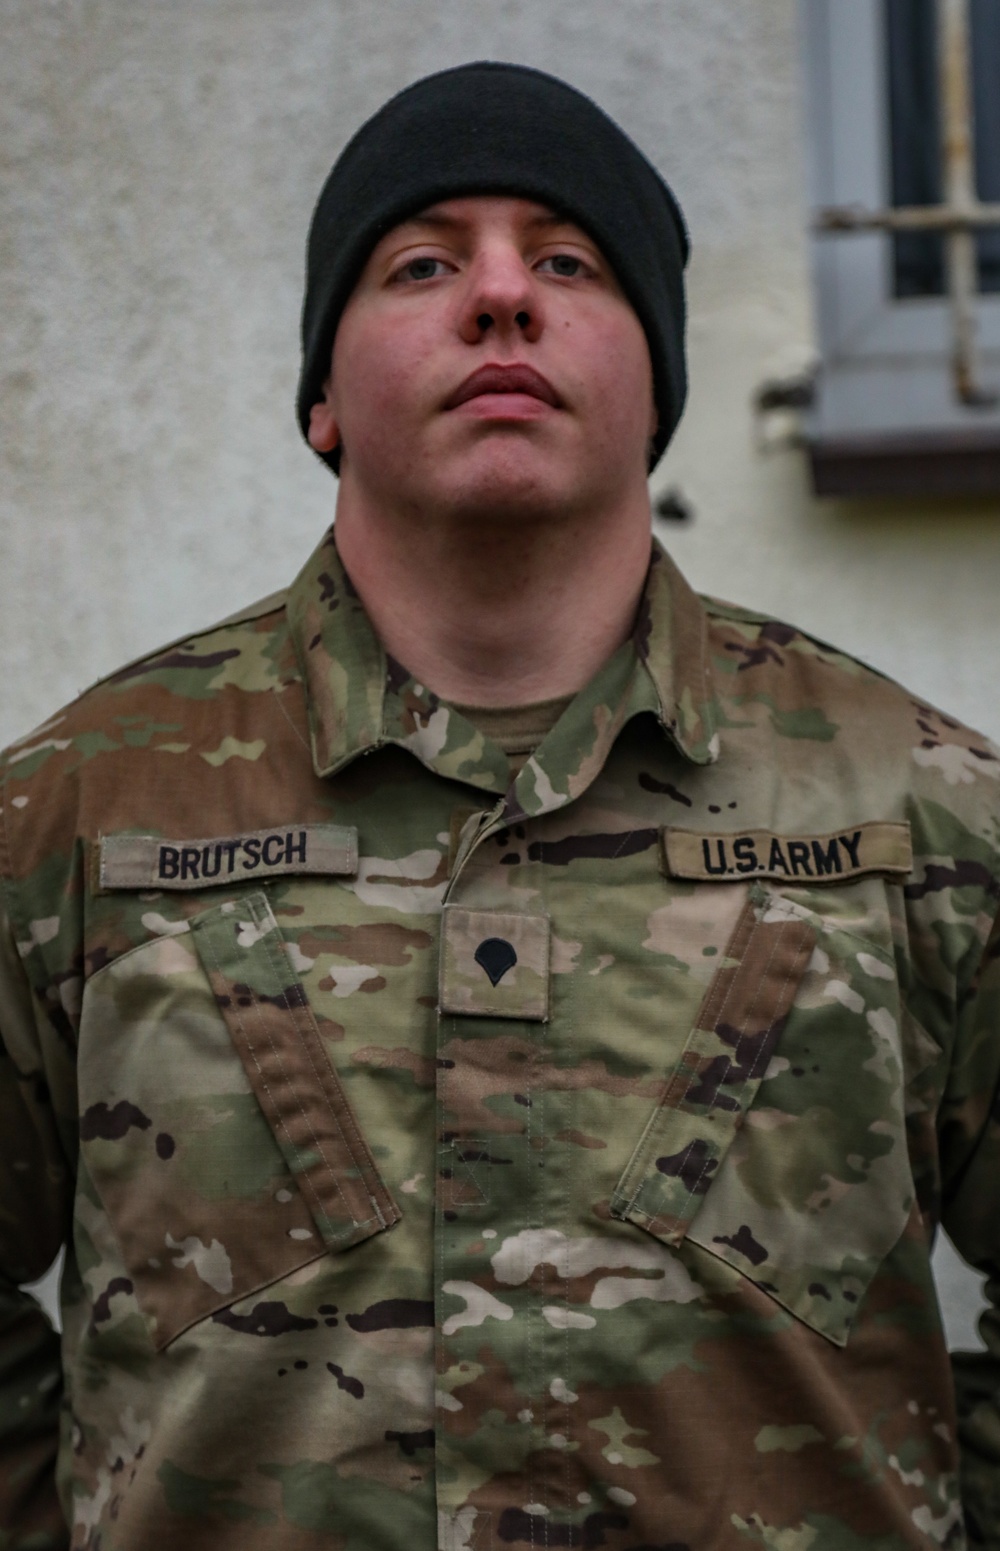 Quest for Educational Opportunities Inspires Soldier Serve